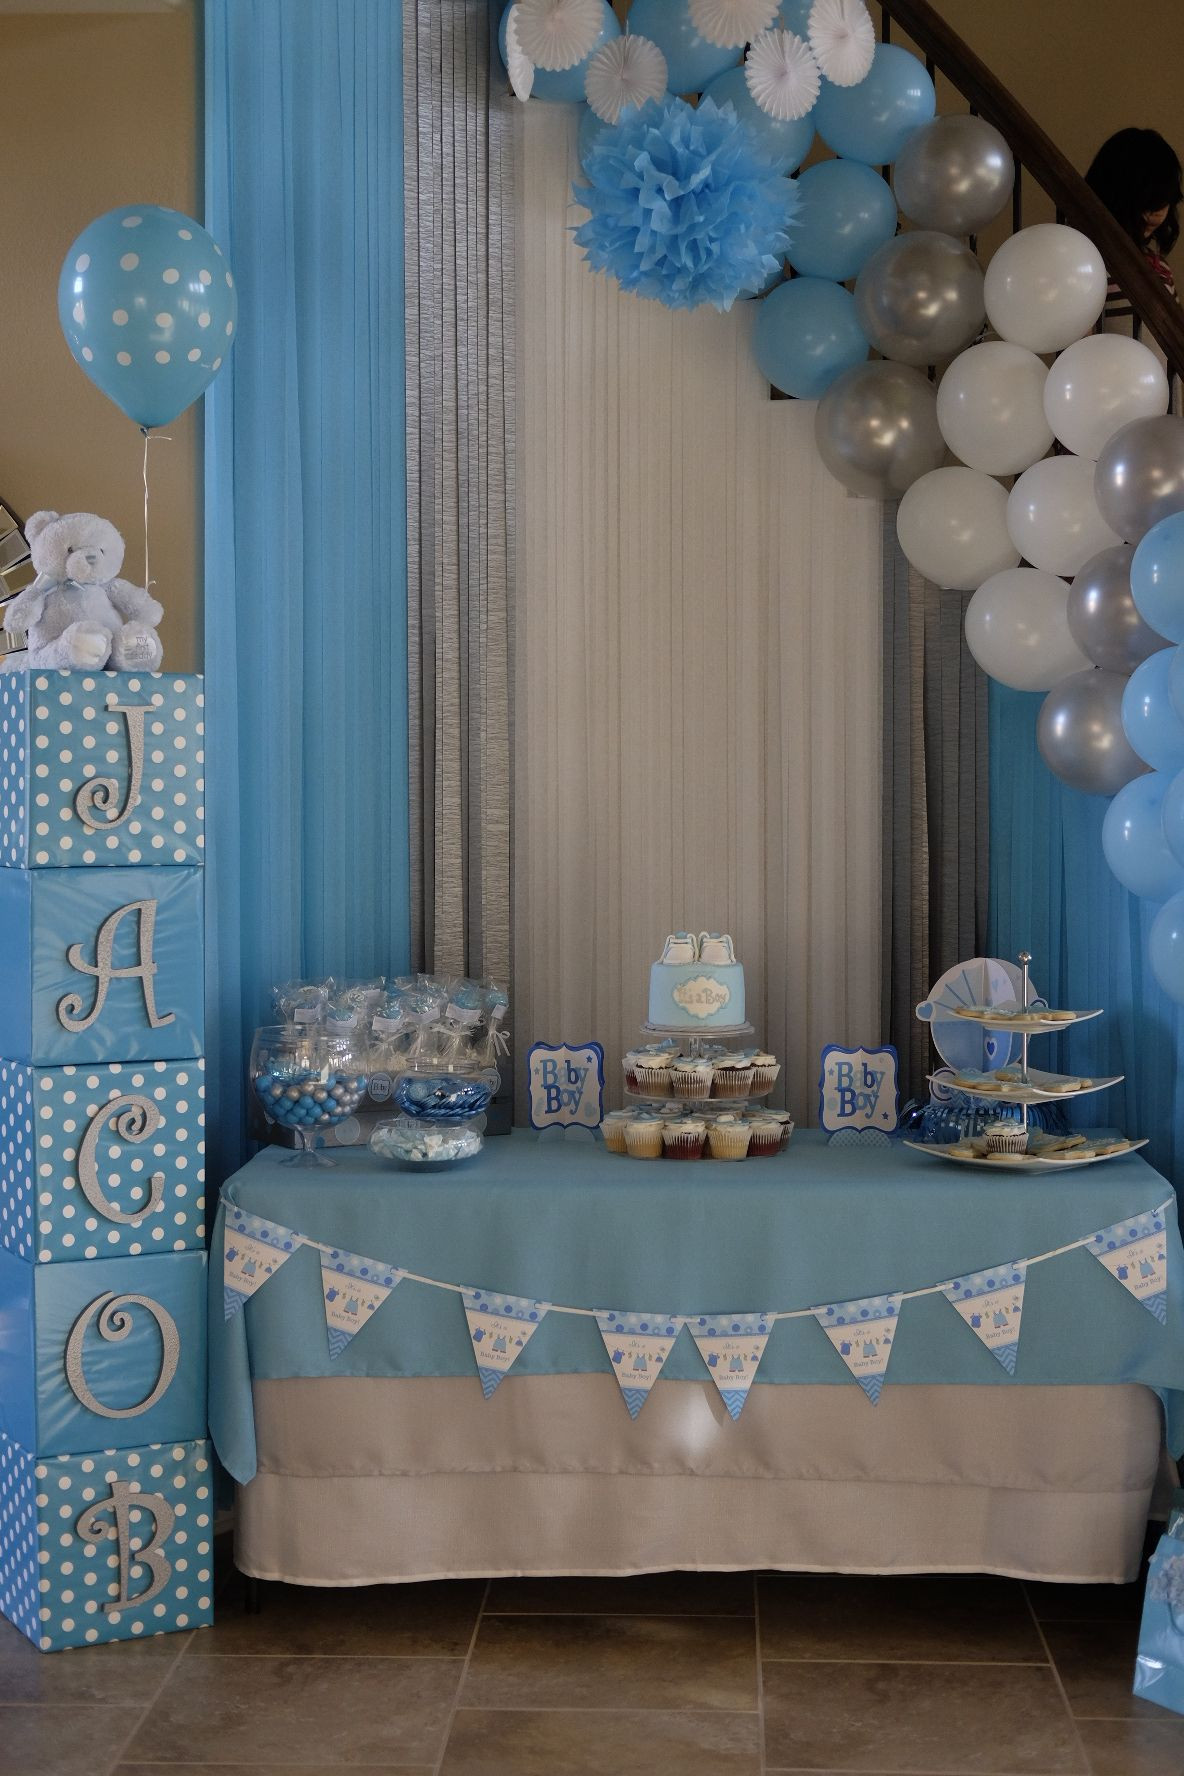 Baby Boy Baby Shower Decor
 Pin by Jennelyn Escoto on BABY JACOB SHOWER in 2019